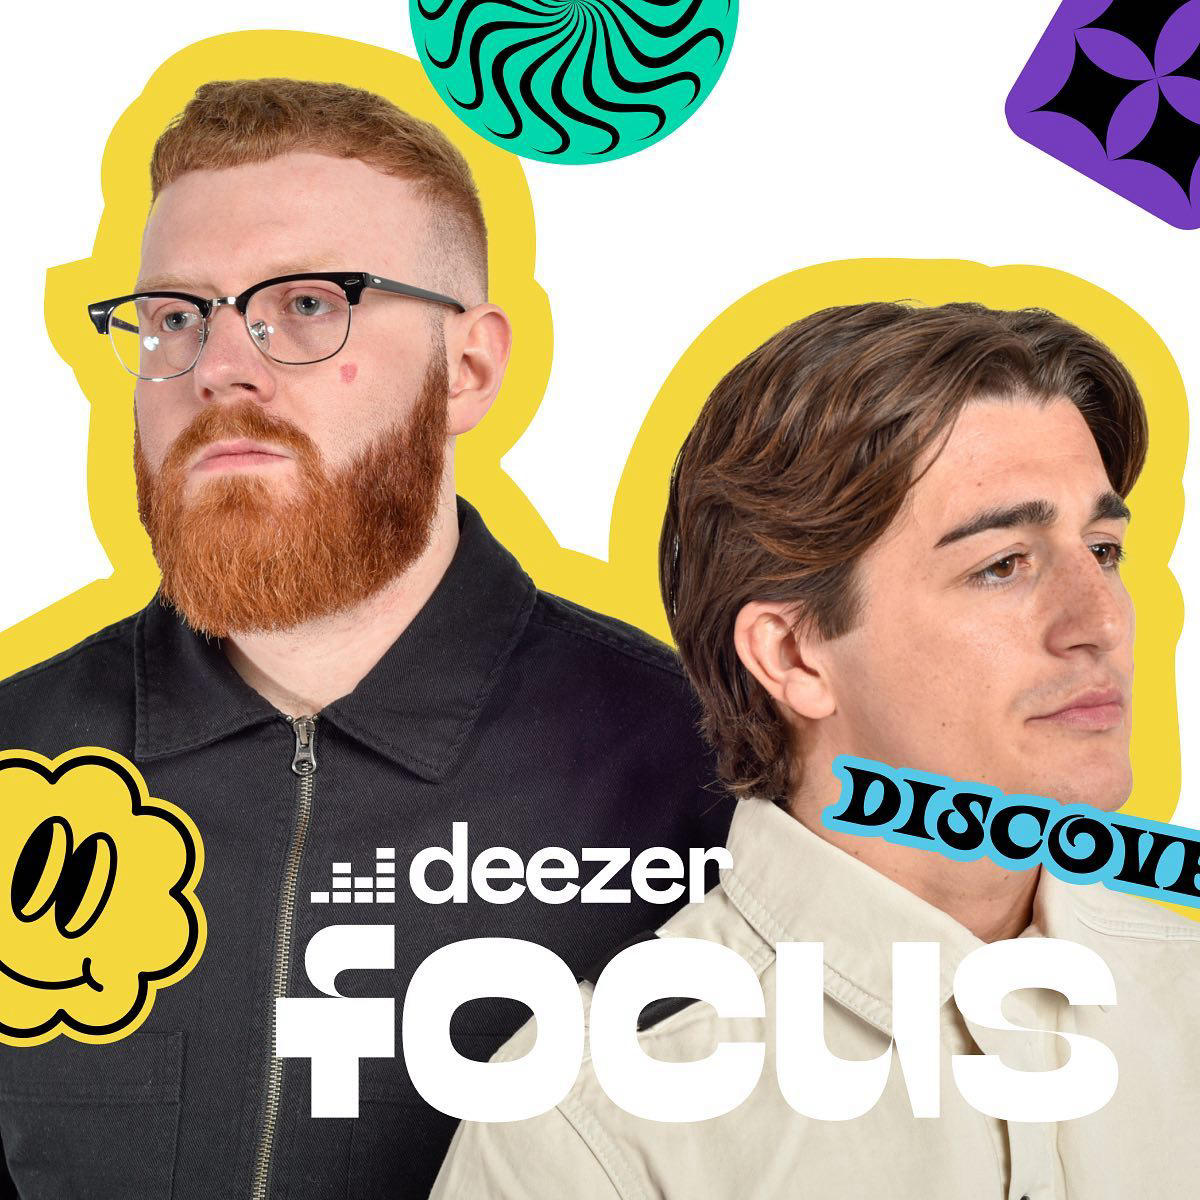 image  1 Deezer - We are excited to announce LF System as our September focus artist